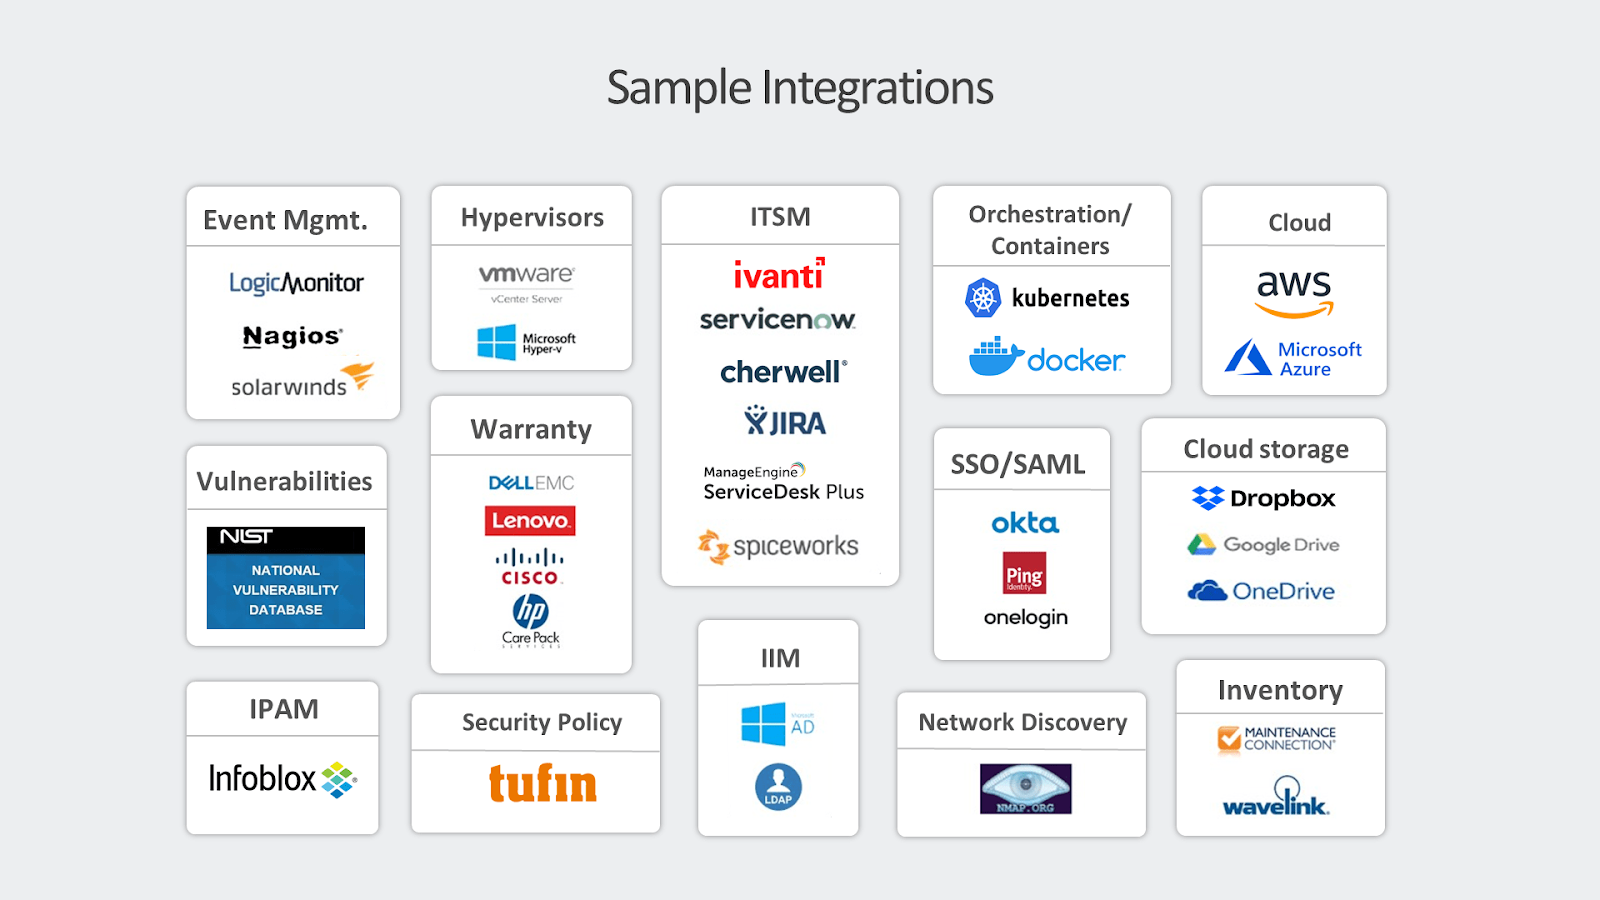 A list of all the sample integrations that Virima offers at the moment